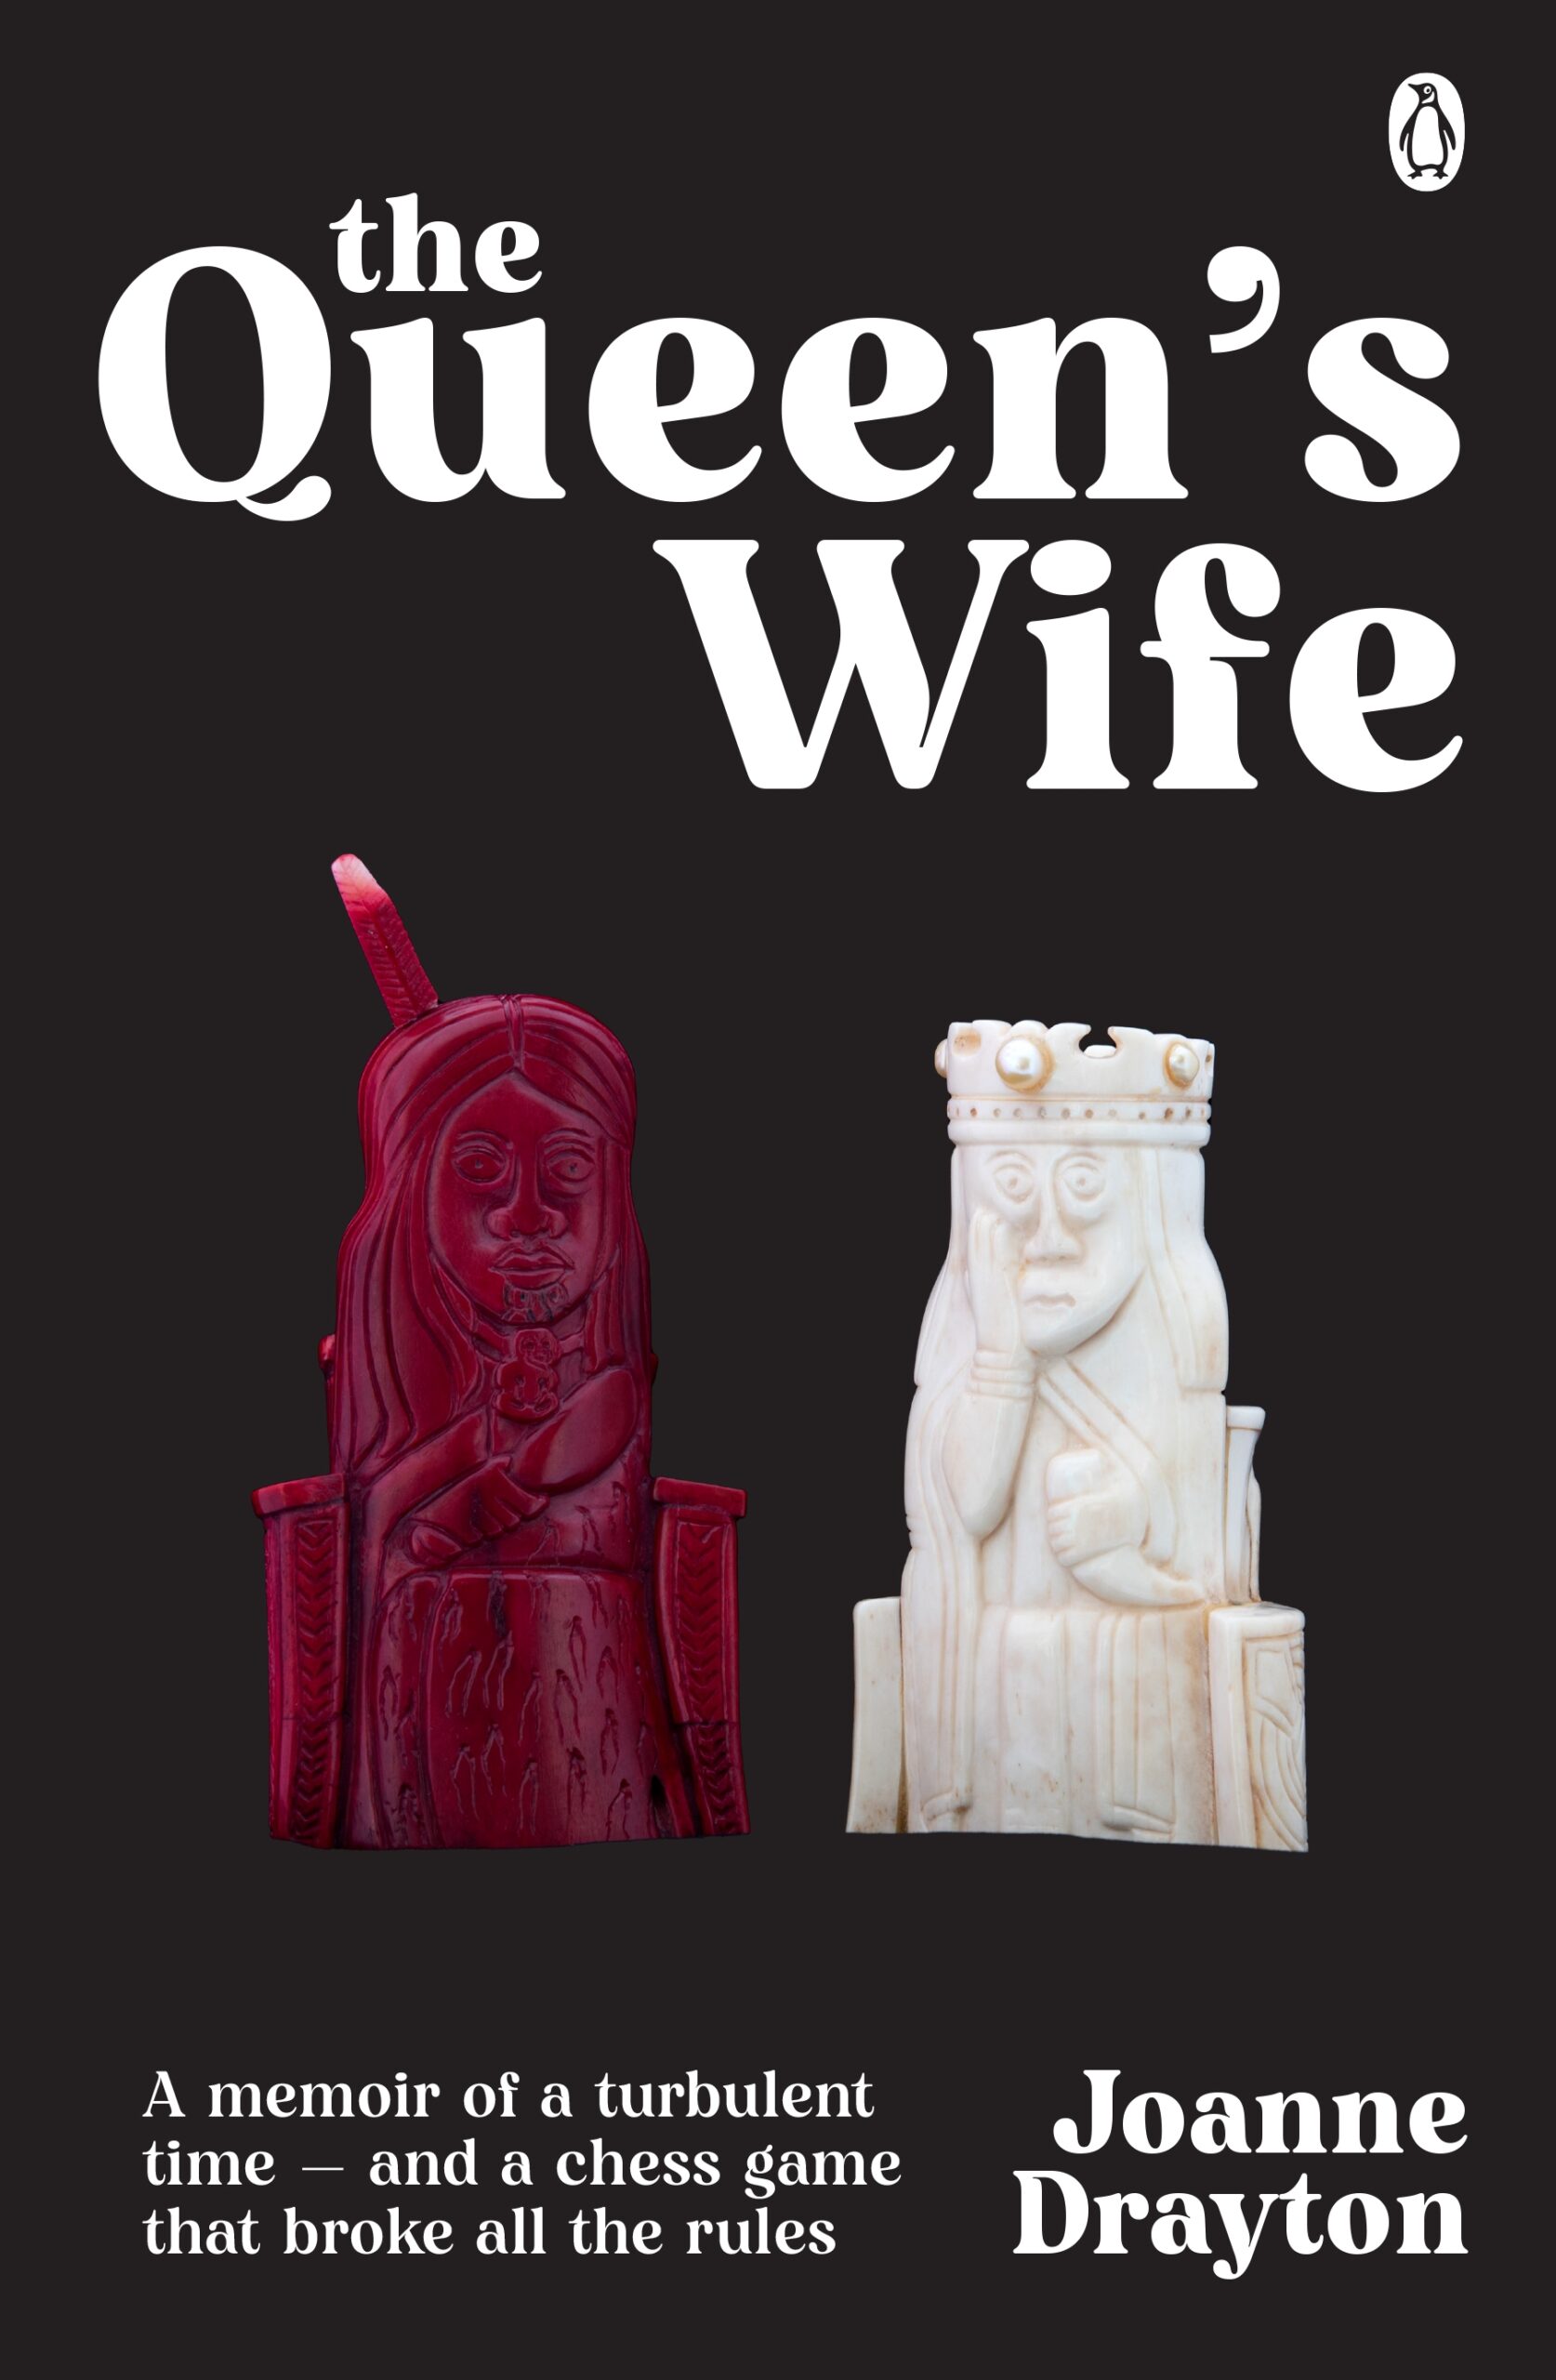 The Queen’s Wife by Joanne Drayton